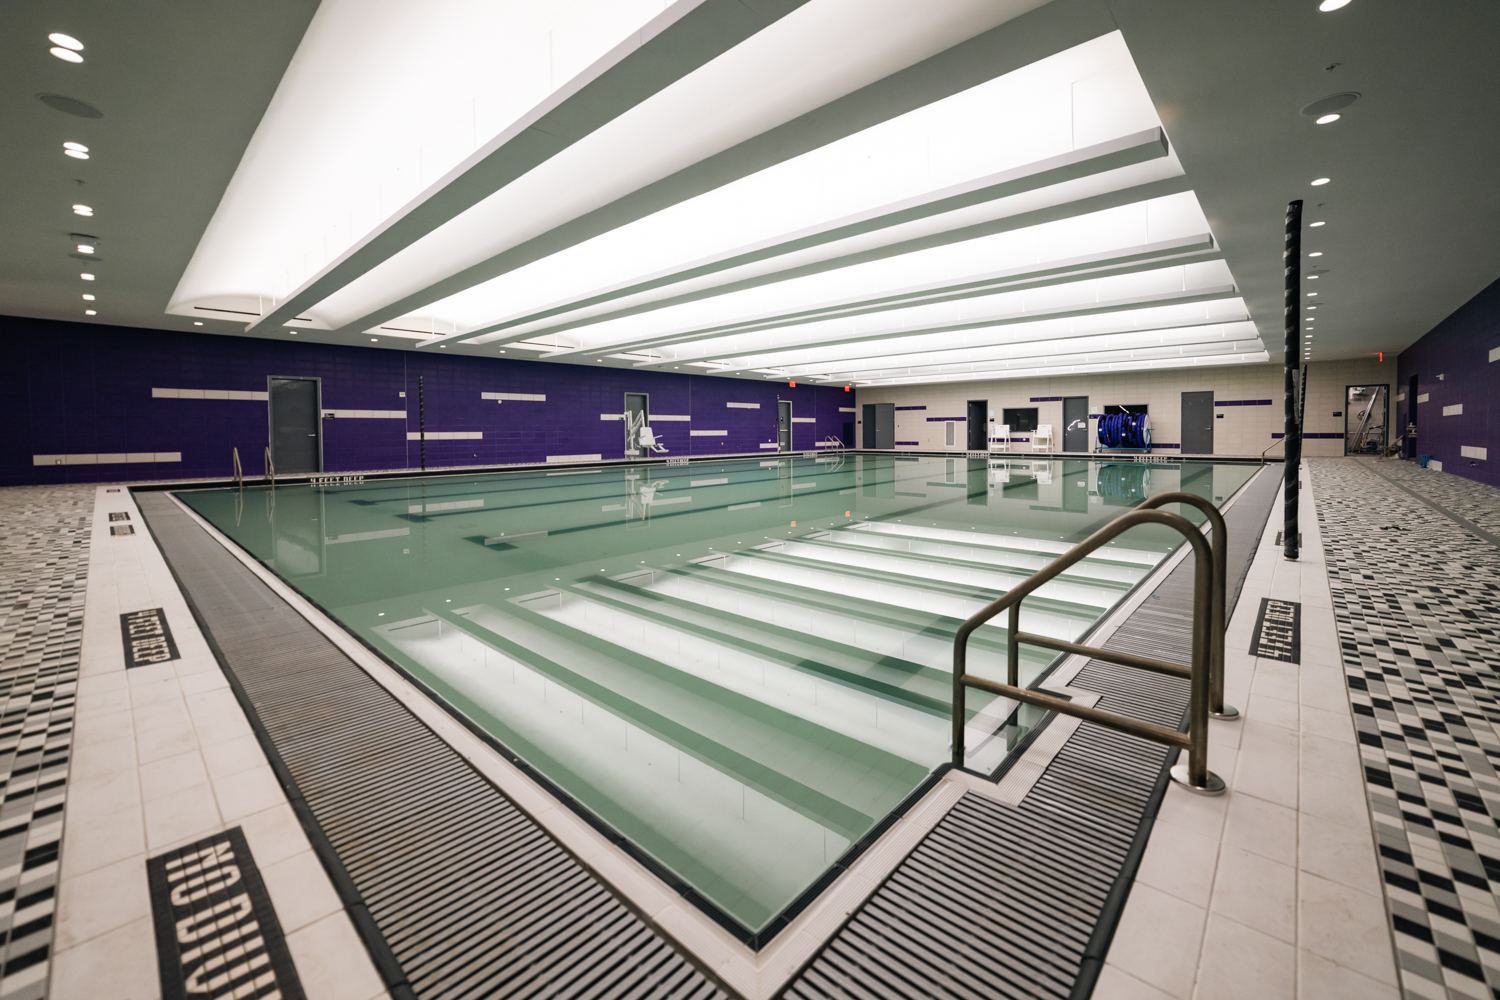 An empty indoor swimming pool with purple walls and a floor with grid patterns surrounding it.